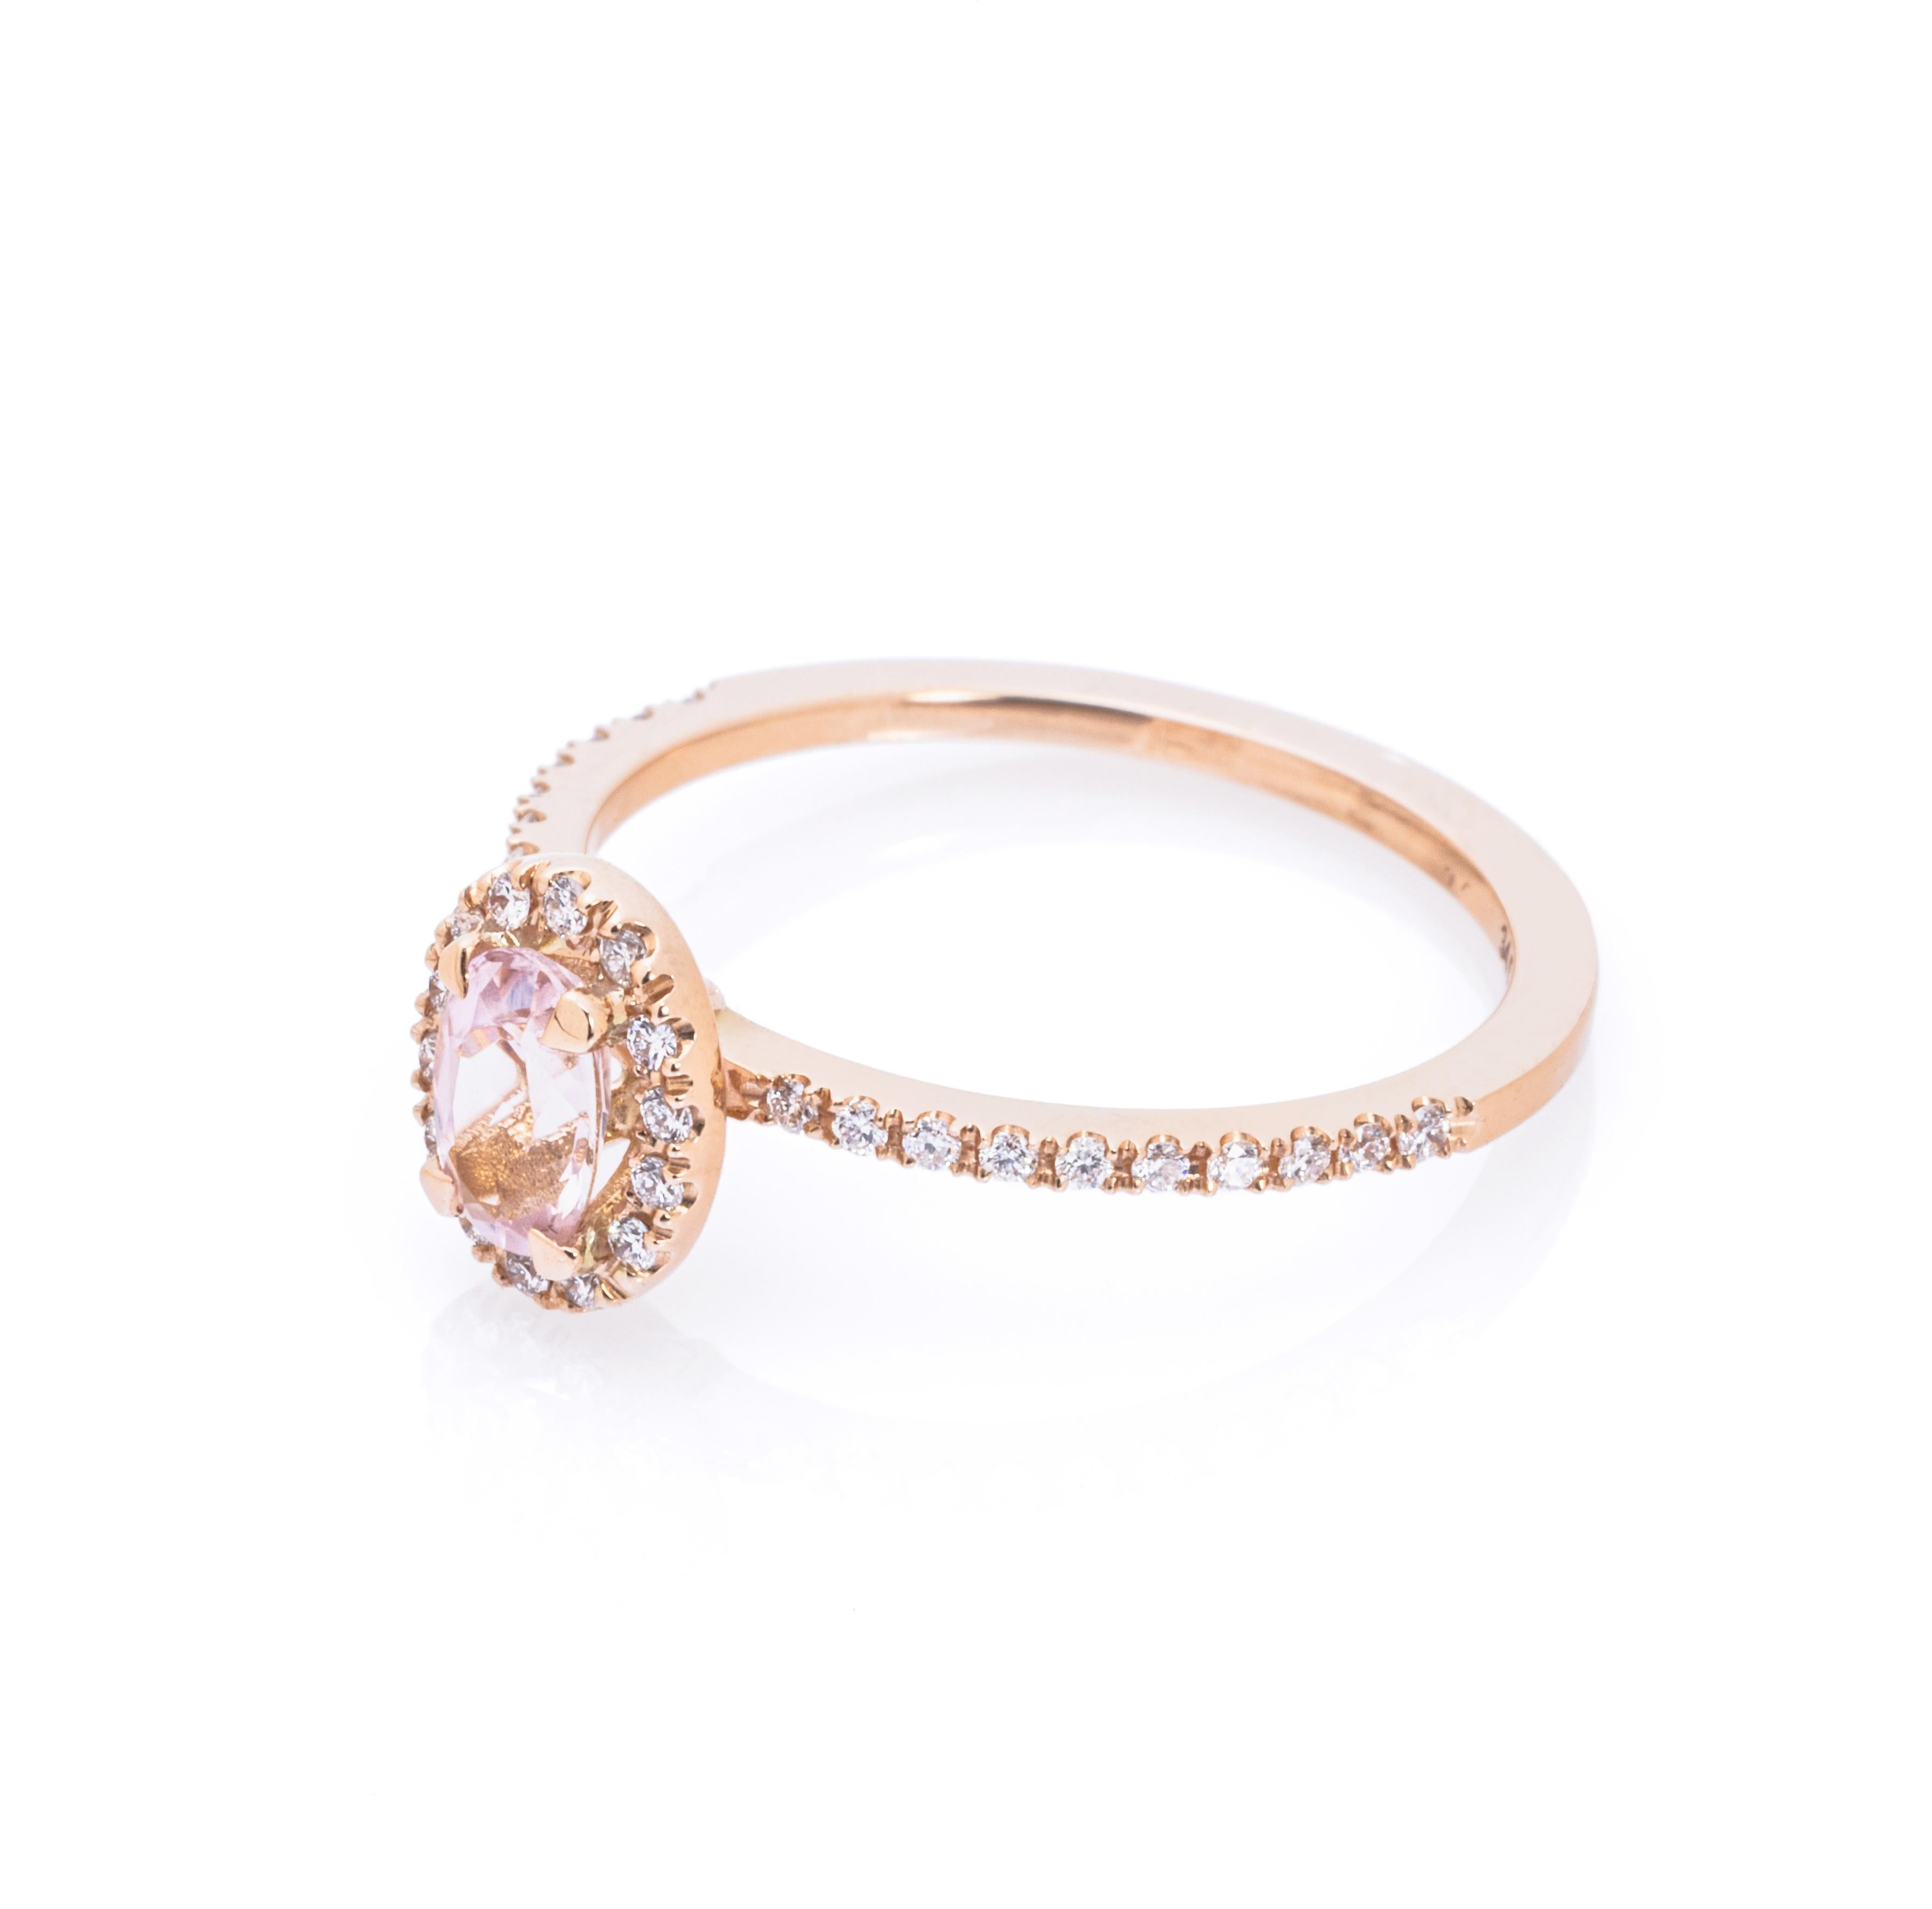 18 Karat Rose Gold Solitaire Ring set with a 0.30ct Light Pink Morganite stone.

Oval cut Morganite
Morganite is supported by 0.17 carat White Diamonds.

This ring is one of Jochen Leën's newest Luxury collection.
Because of this soft pink colour